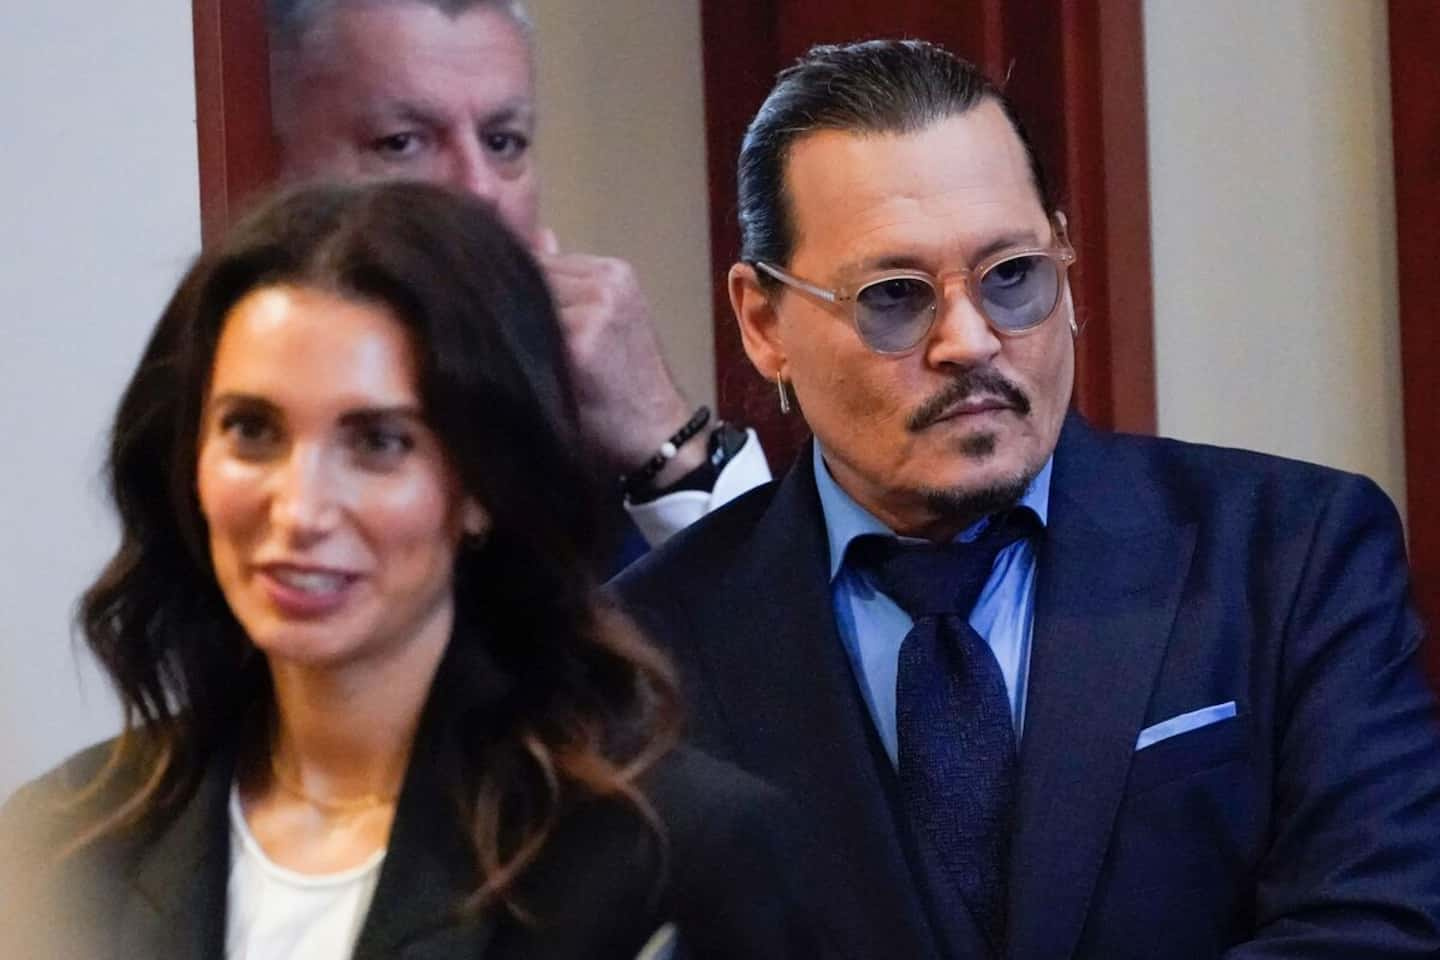 Johnny Depp wants to "resume the course of his life", assures his lawyer